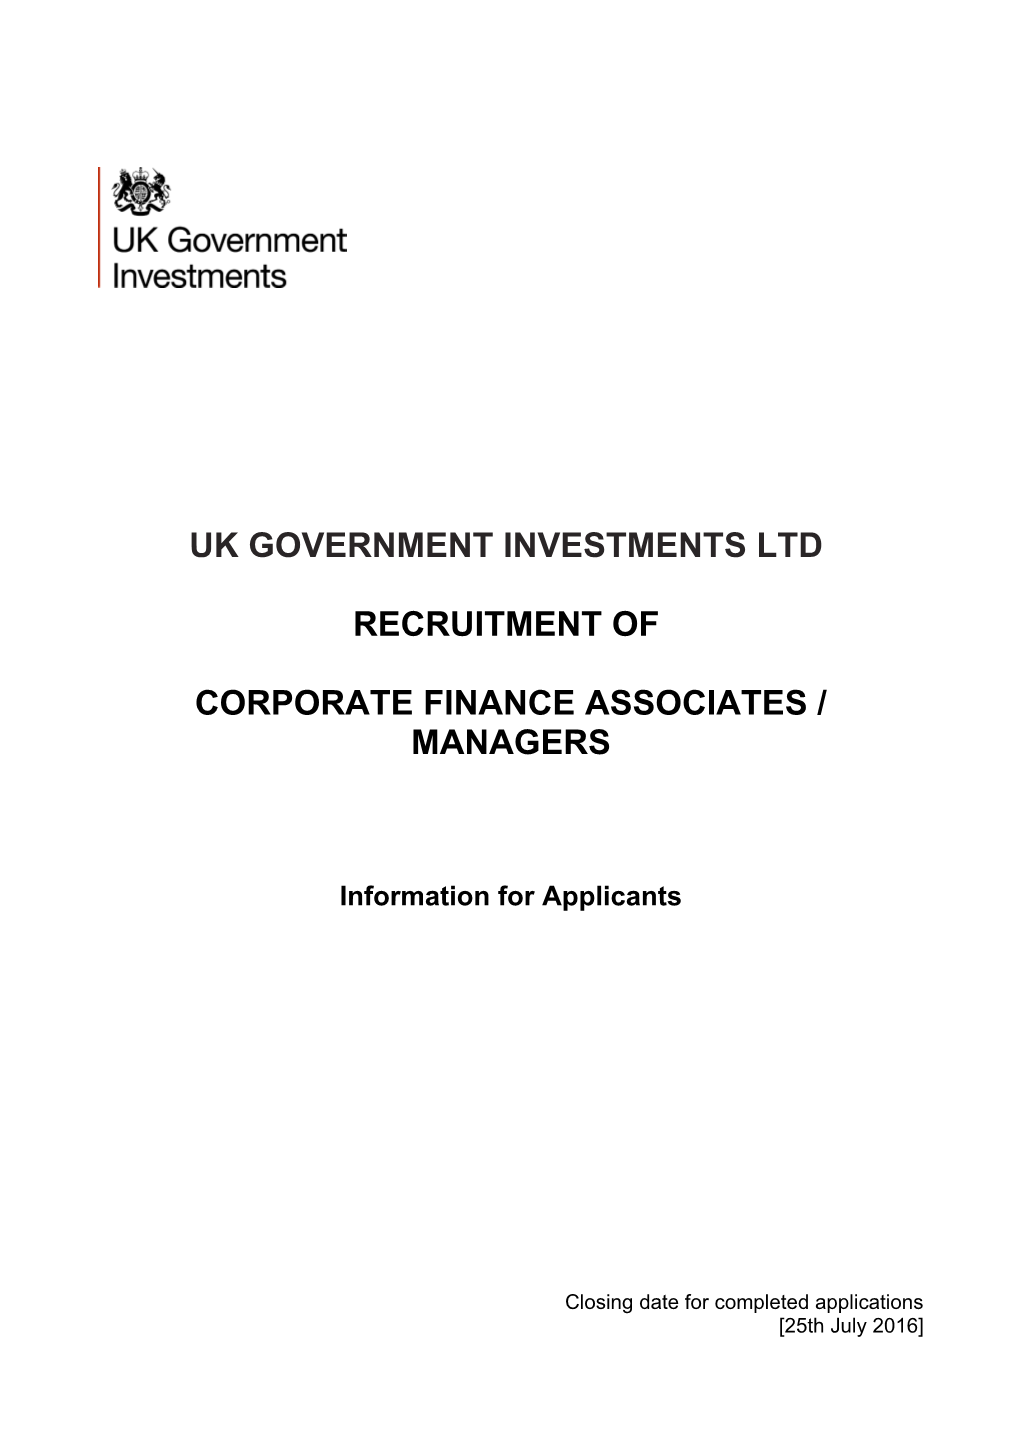 Corporate Finance Associates/Managers